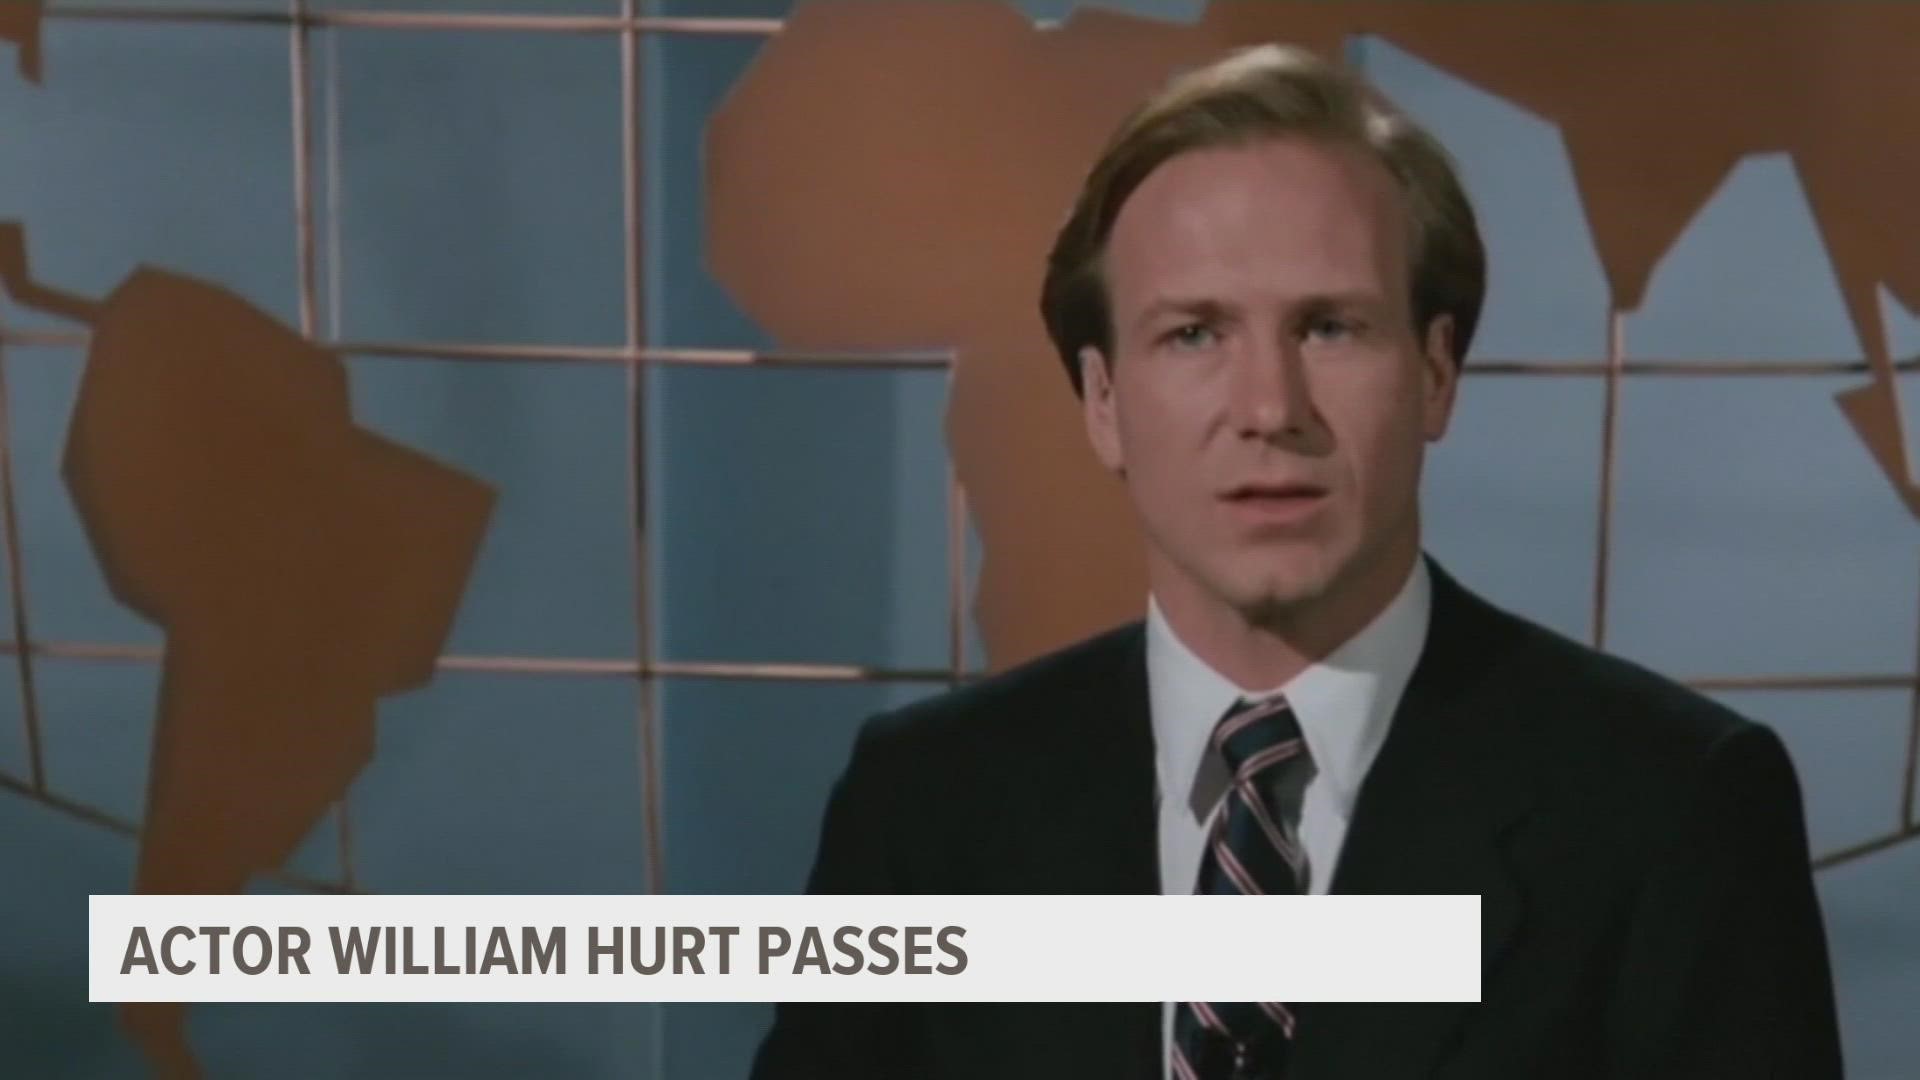 In a long-running career, William Hurt earned three consecutive Academy Award nominations for Best Actor, winning for 1985's “Kiss of the Spider Woman.”